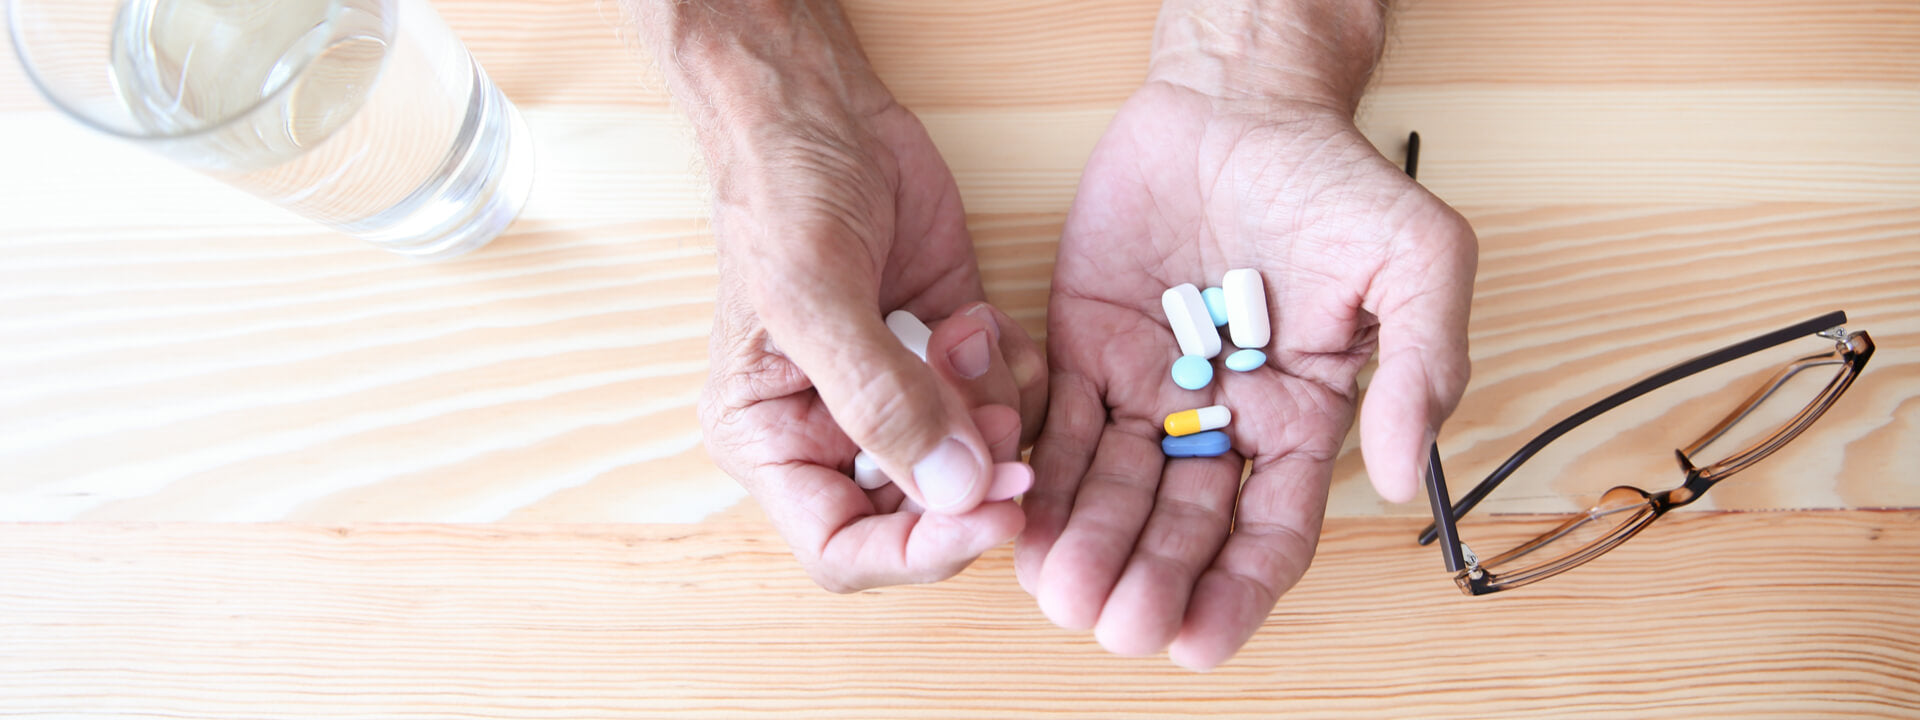 Popping Pills Increases Cases of Erectile Dysfunction